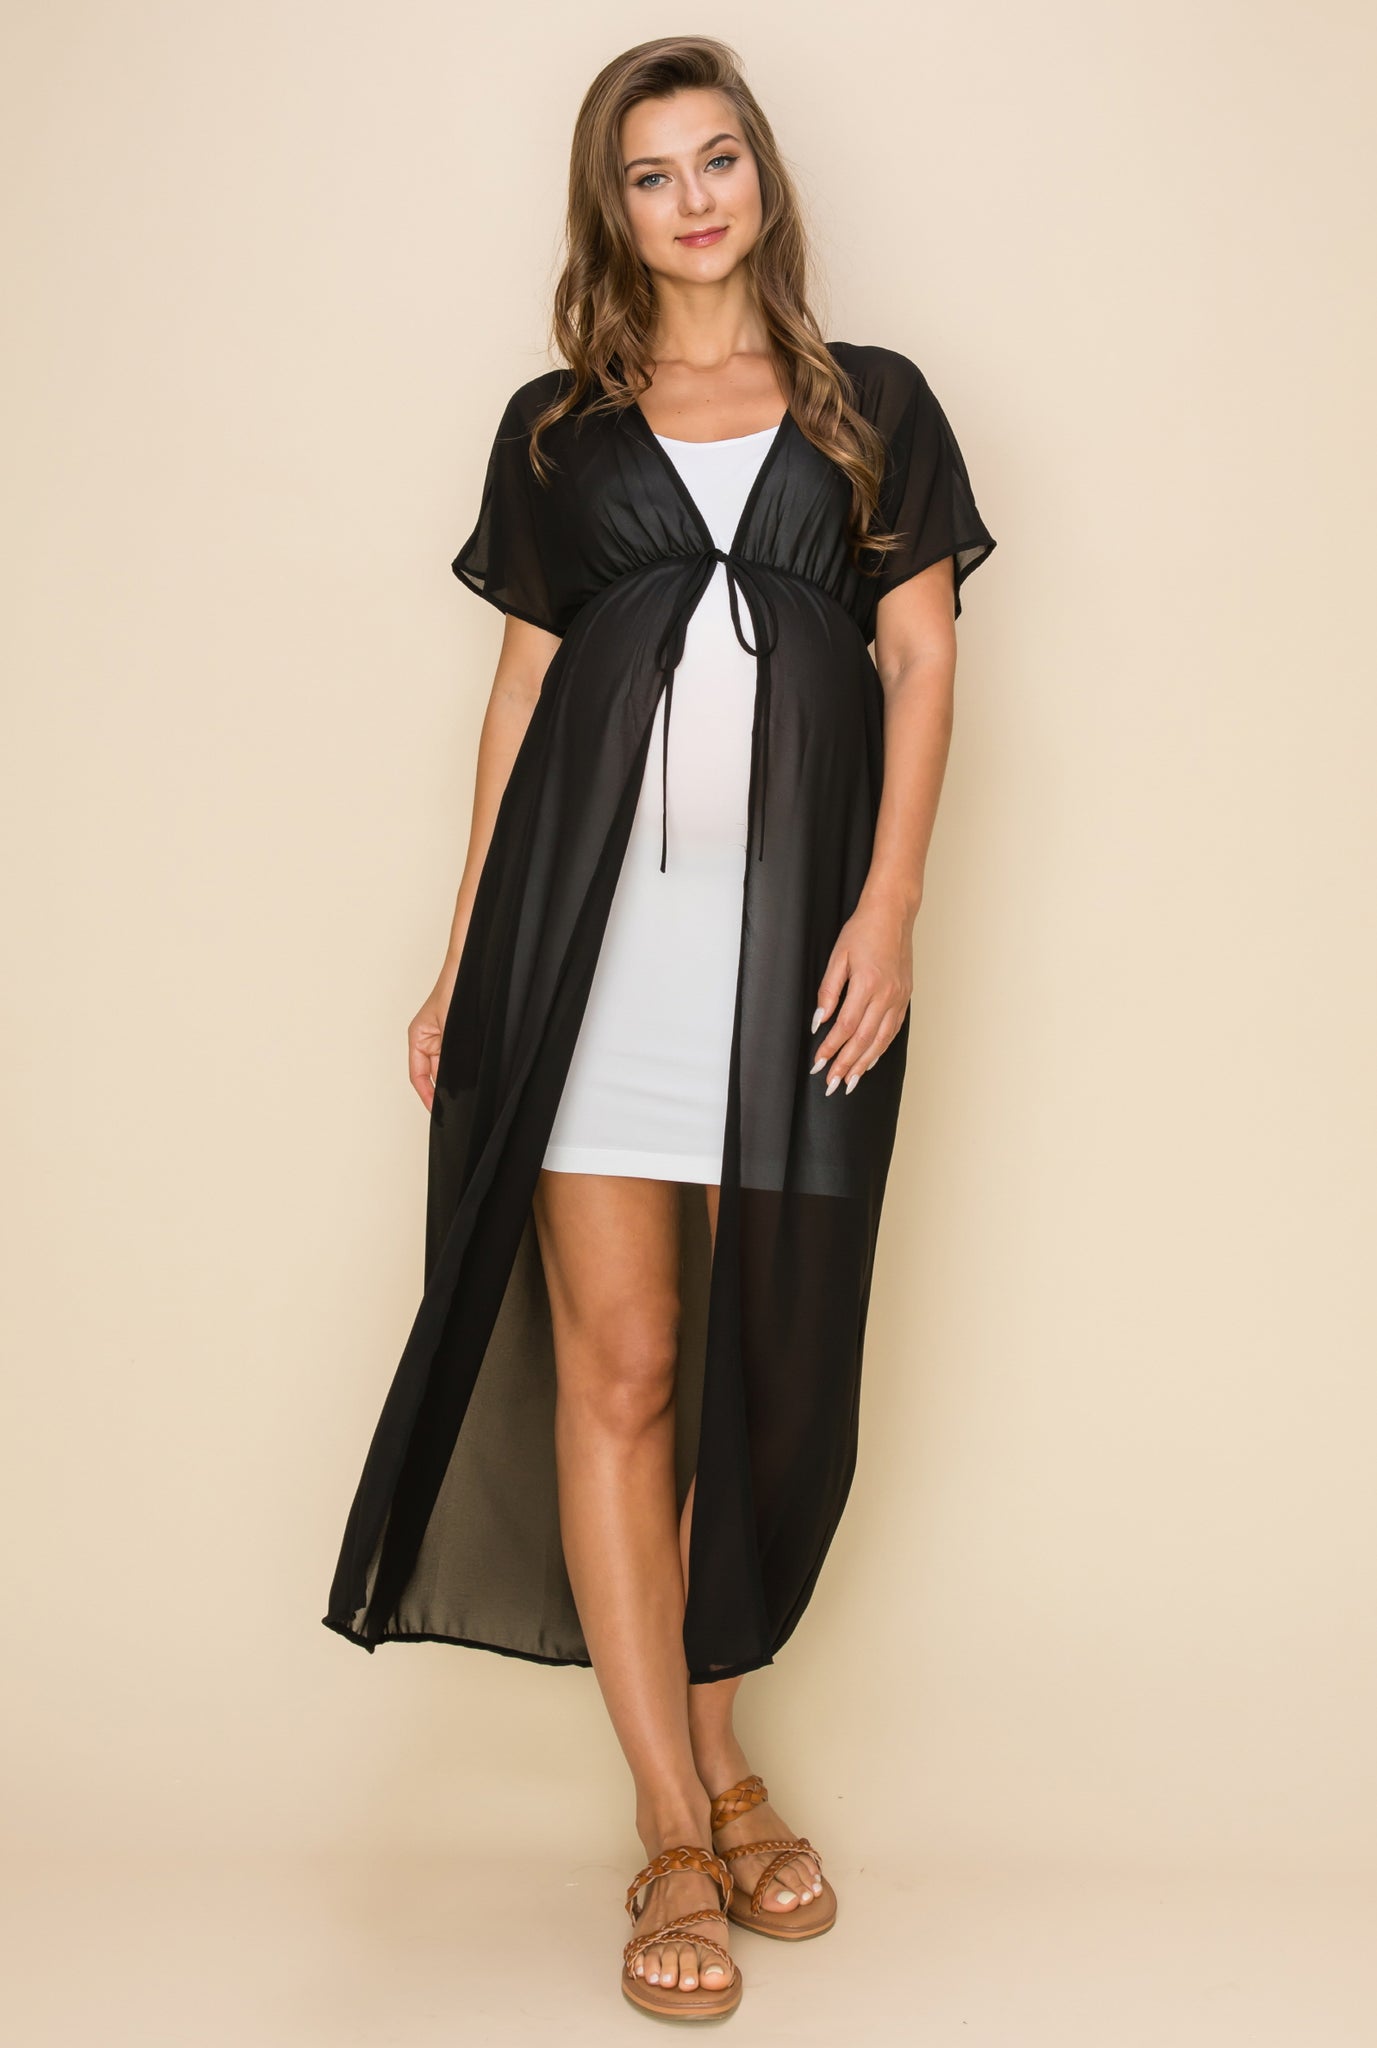 Charlee Sheer Mesh Cover Up